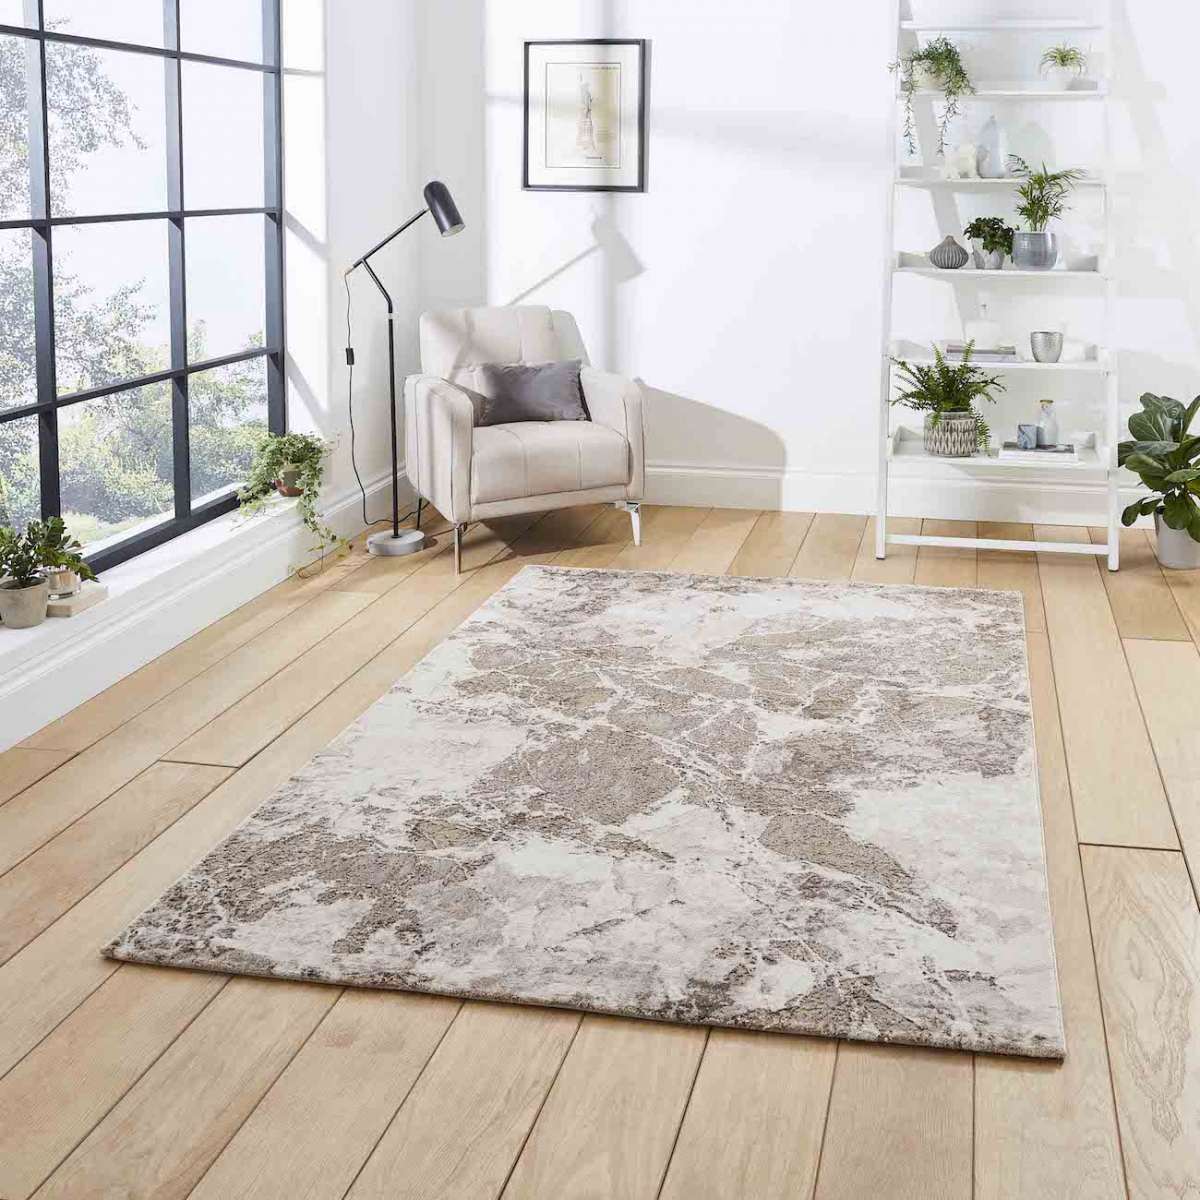 Teppich ThinkRugs Florence 50033 beige silver